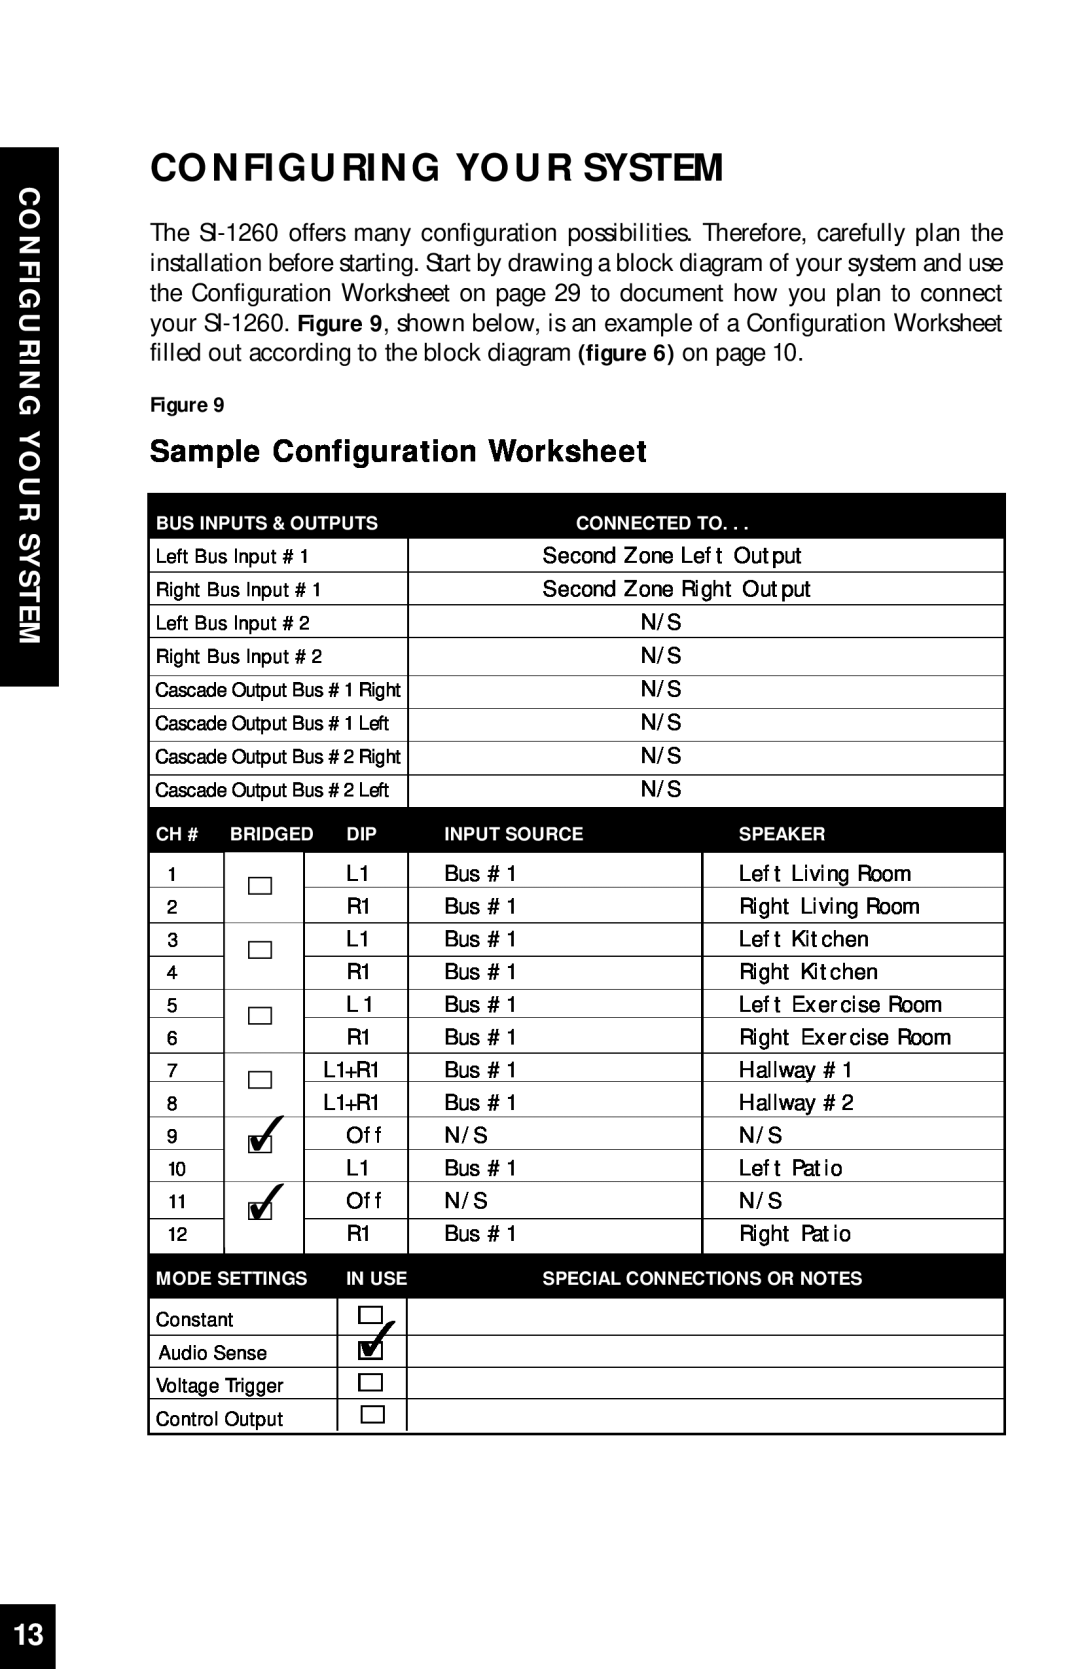 Niles Audio SI-1260 manual Configuring Your System, Sample Configuration Worksheet 